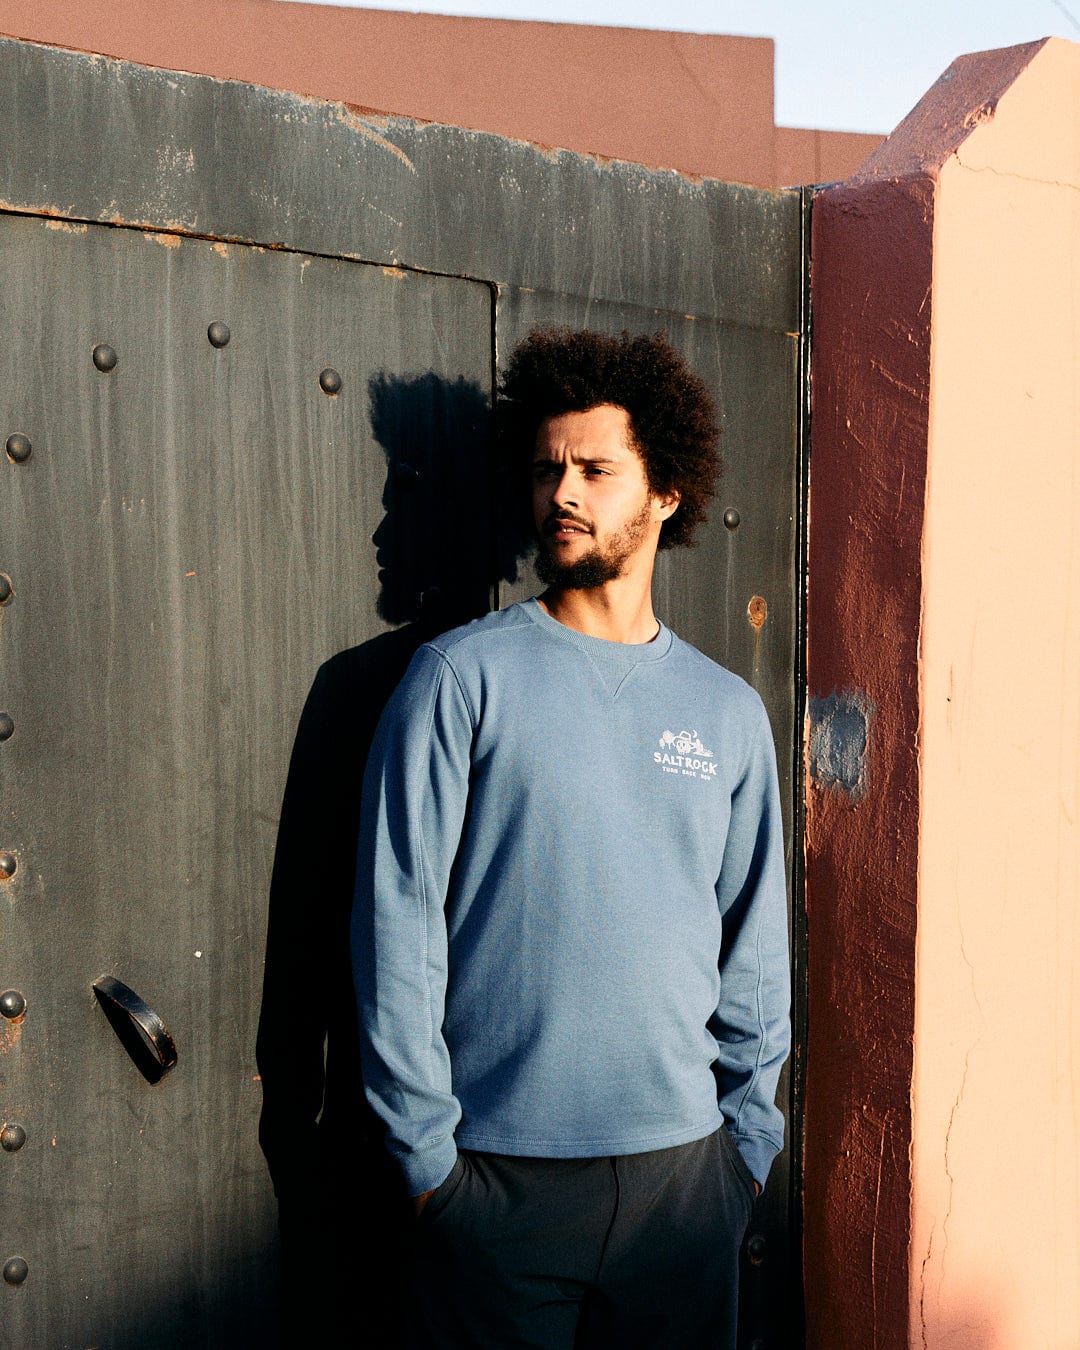 A man with an afro stands beside a rustic metal door at the Last Stop Motel, wearing a Saltrock blue long-sleeve shirt with a crew neckline, gazing to the side in soft sunlight.